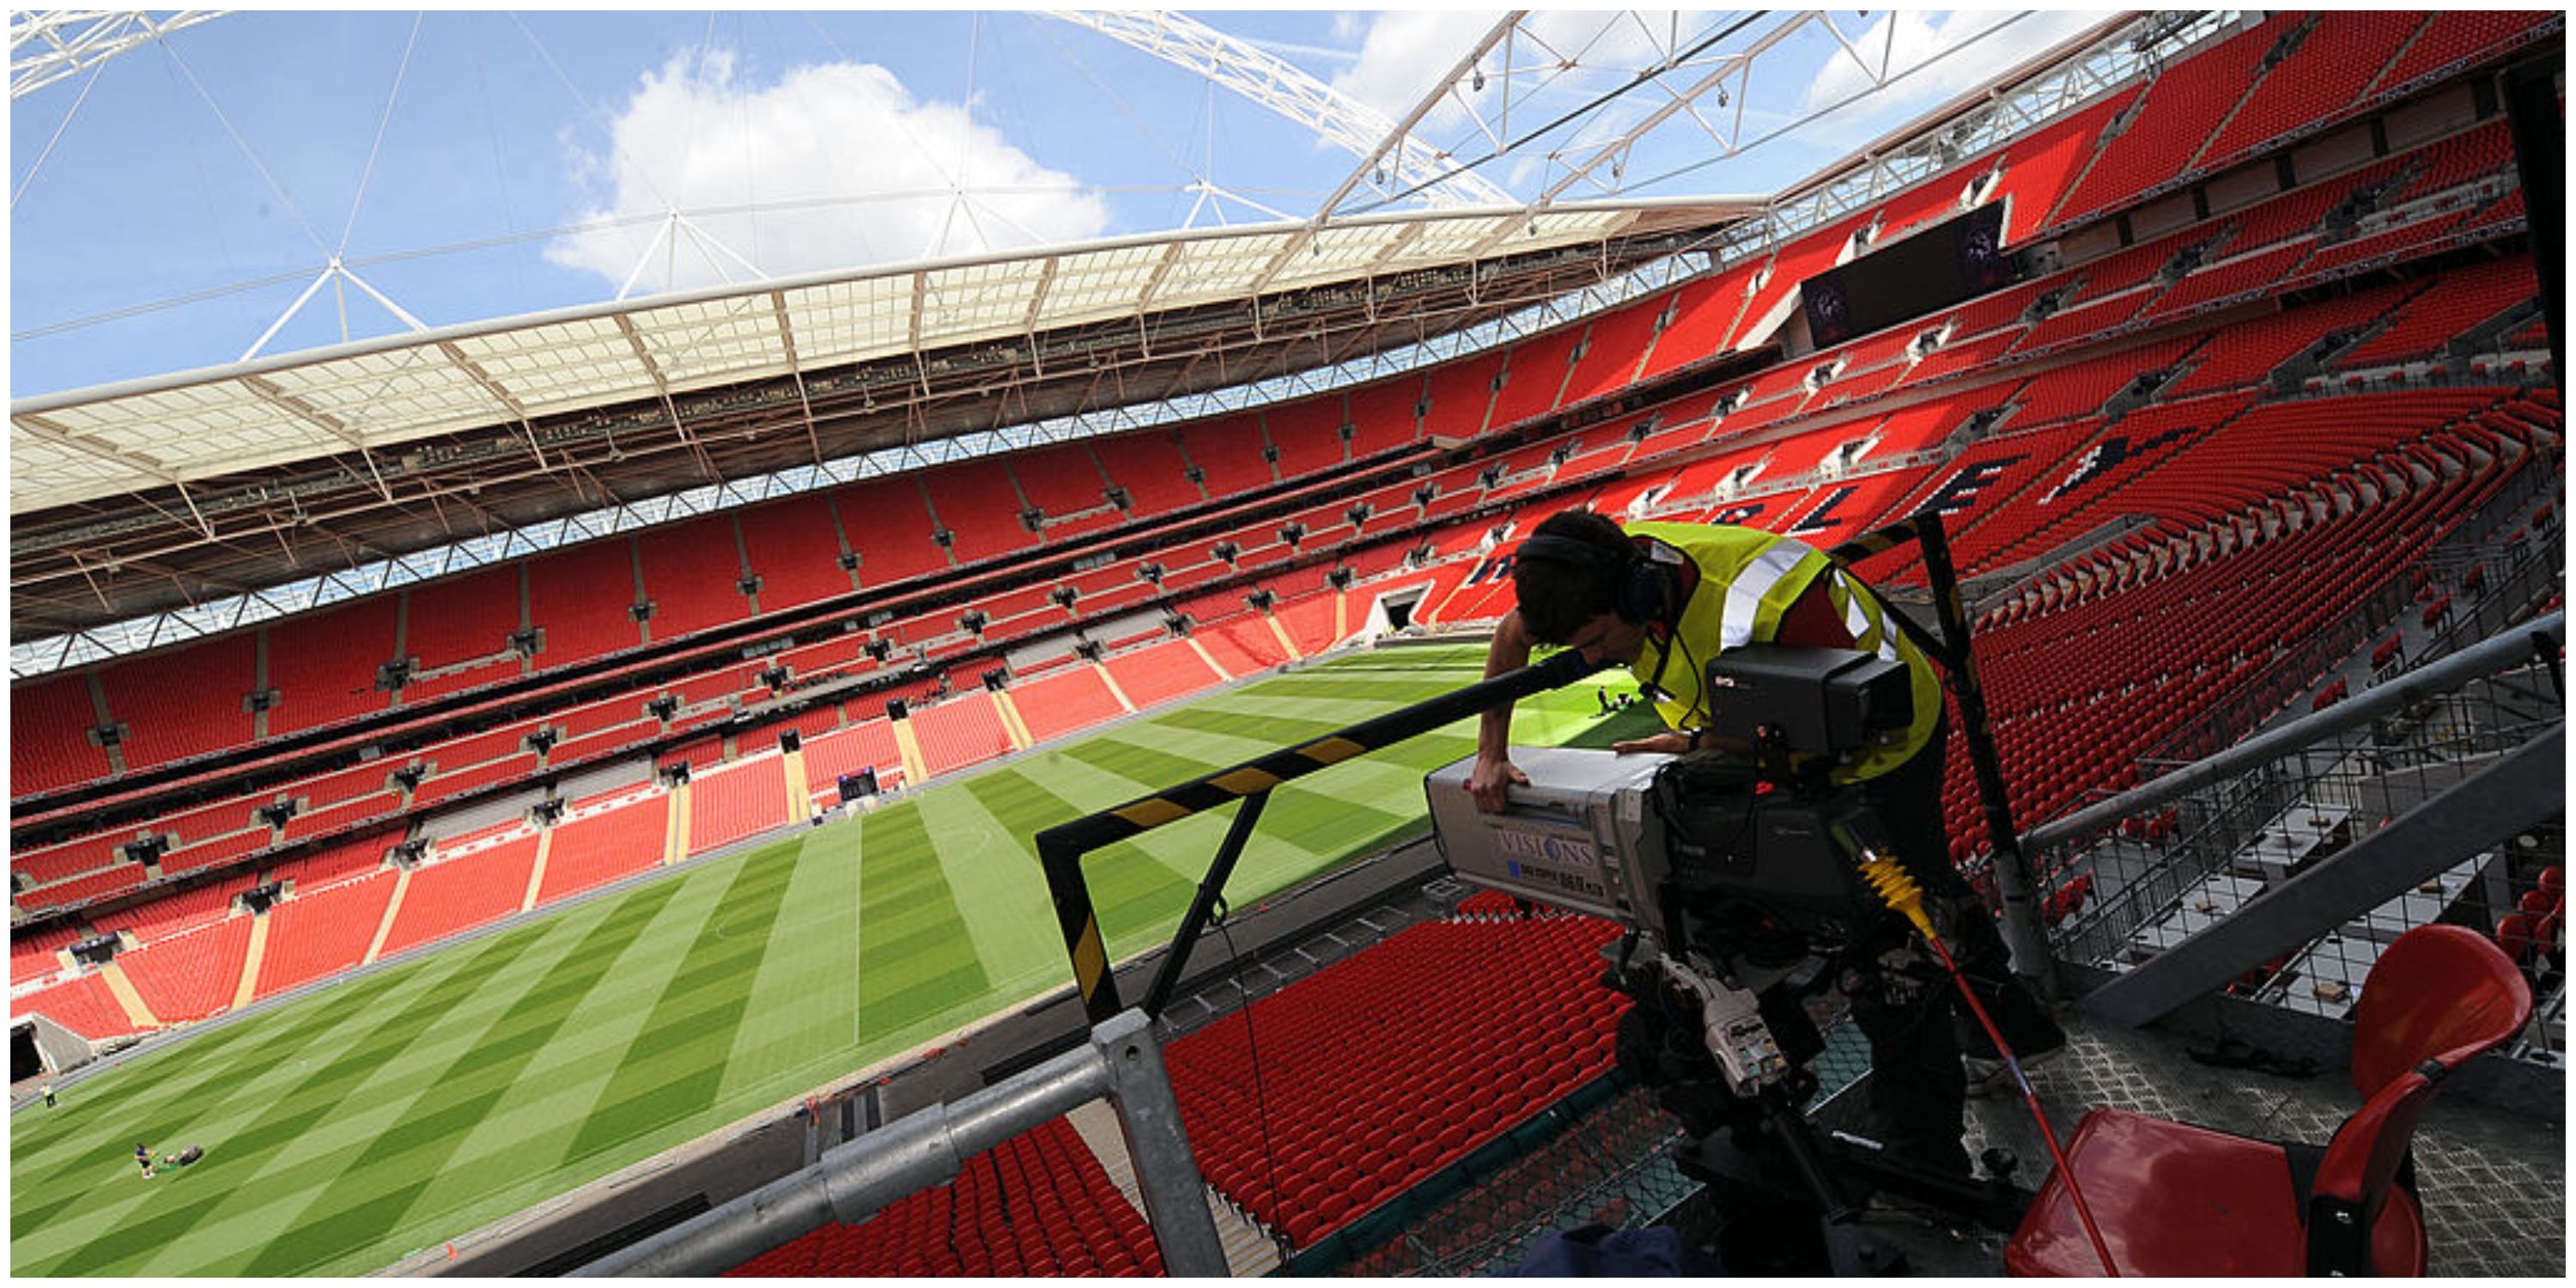 Video from FA Cup semi-final shows the delay between football games and  live TV broadcast